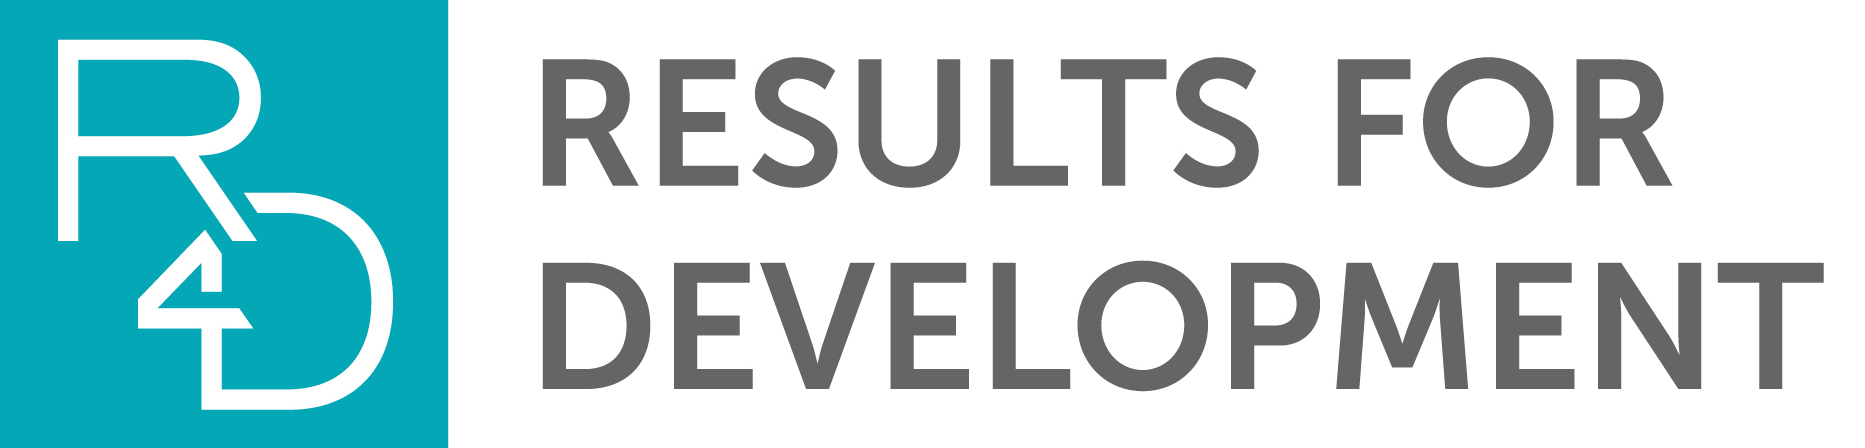 Results for Development (R4D)